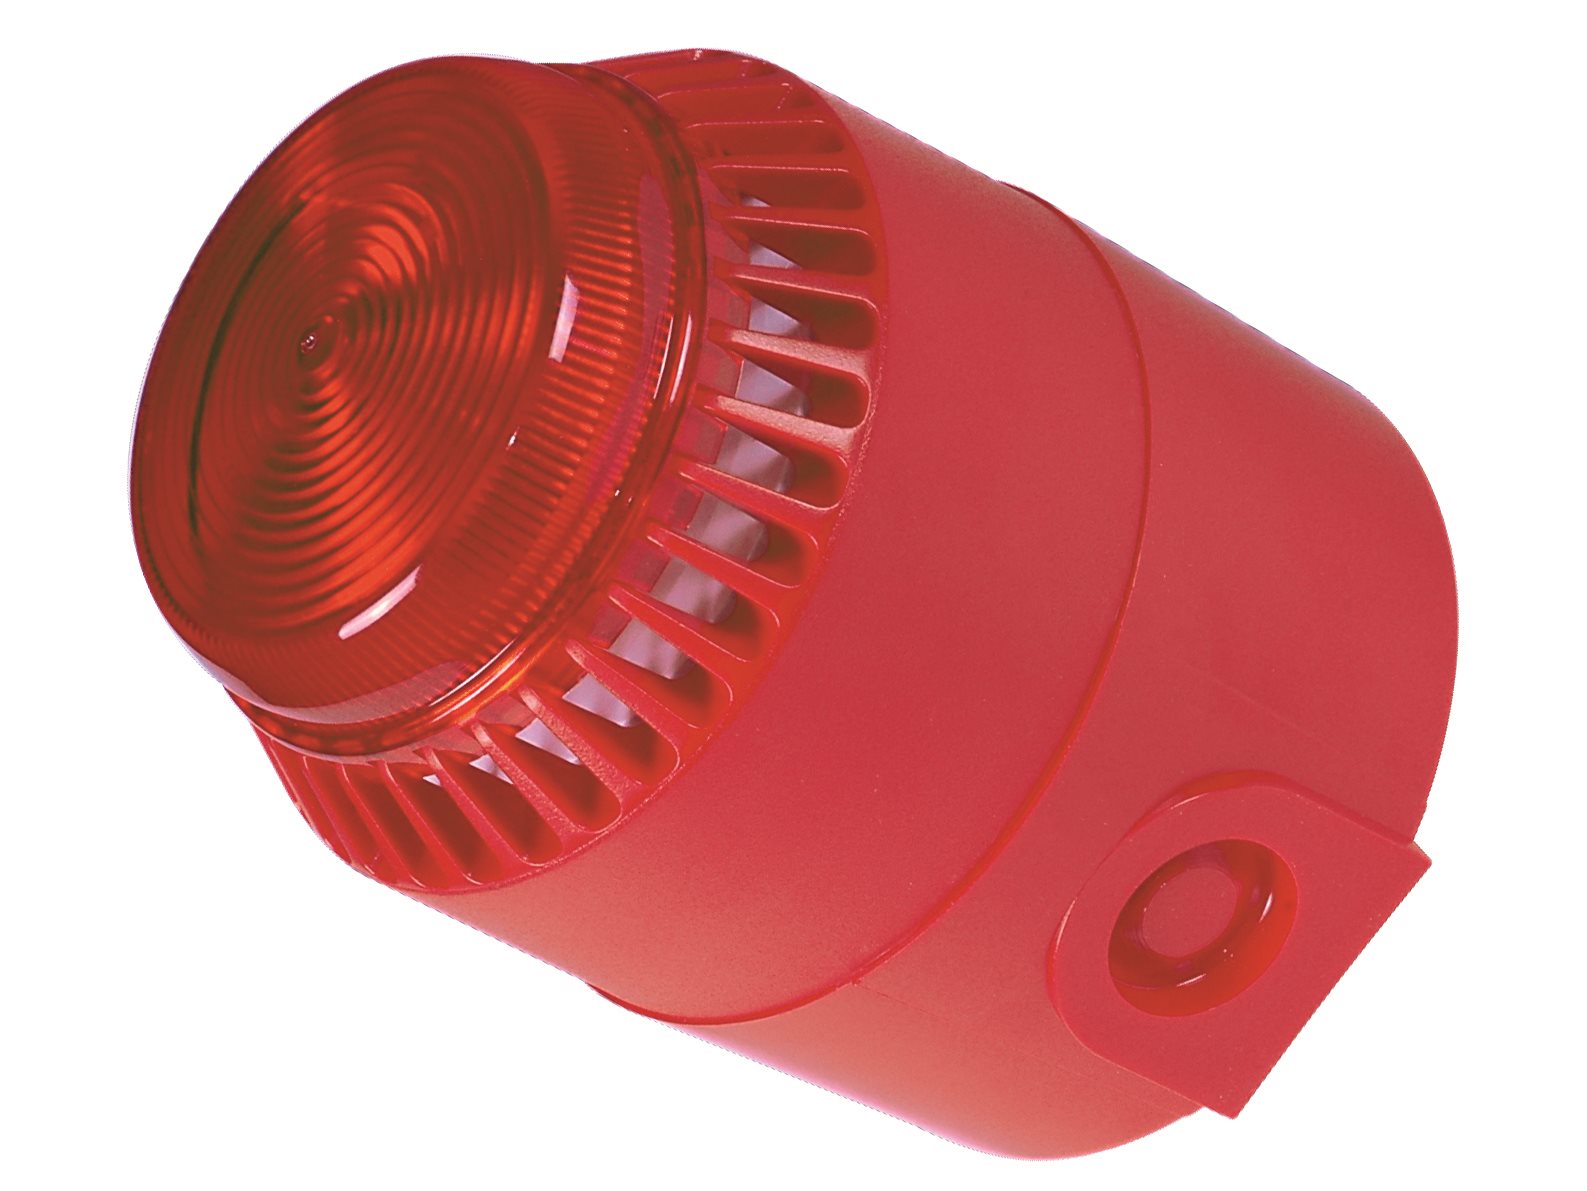 Isaac Numeriek als Combined sound/light - Alarm units - Fire and gas detection systems -  Productweb en